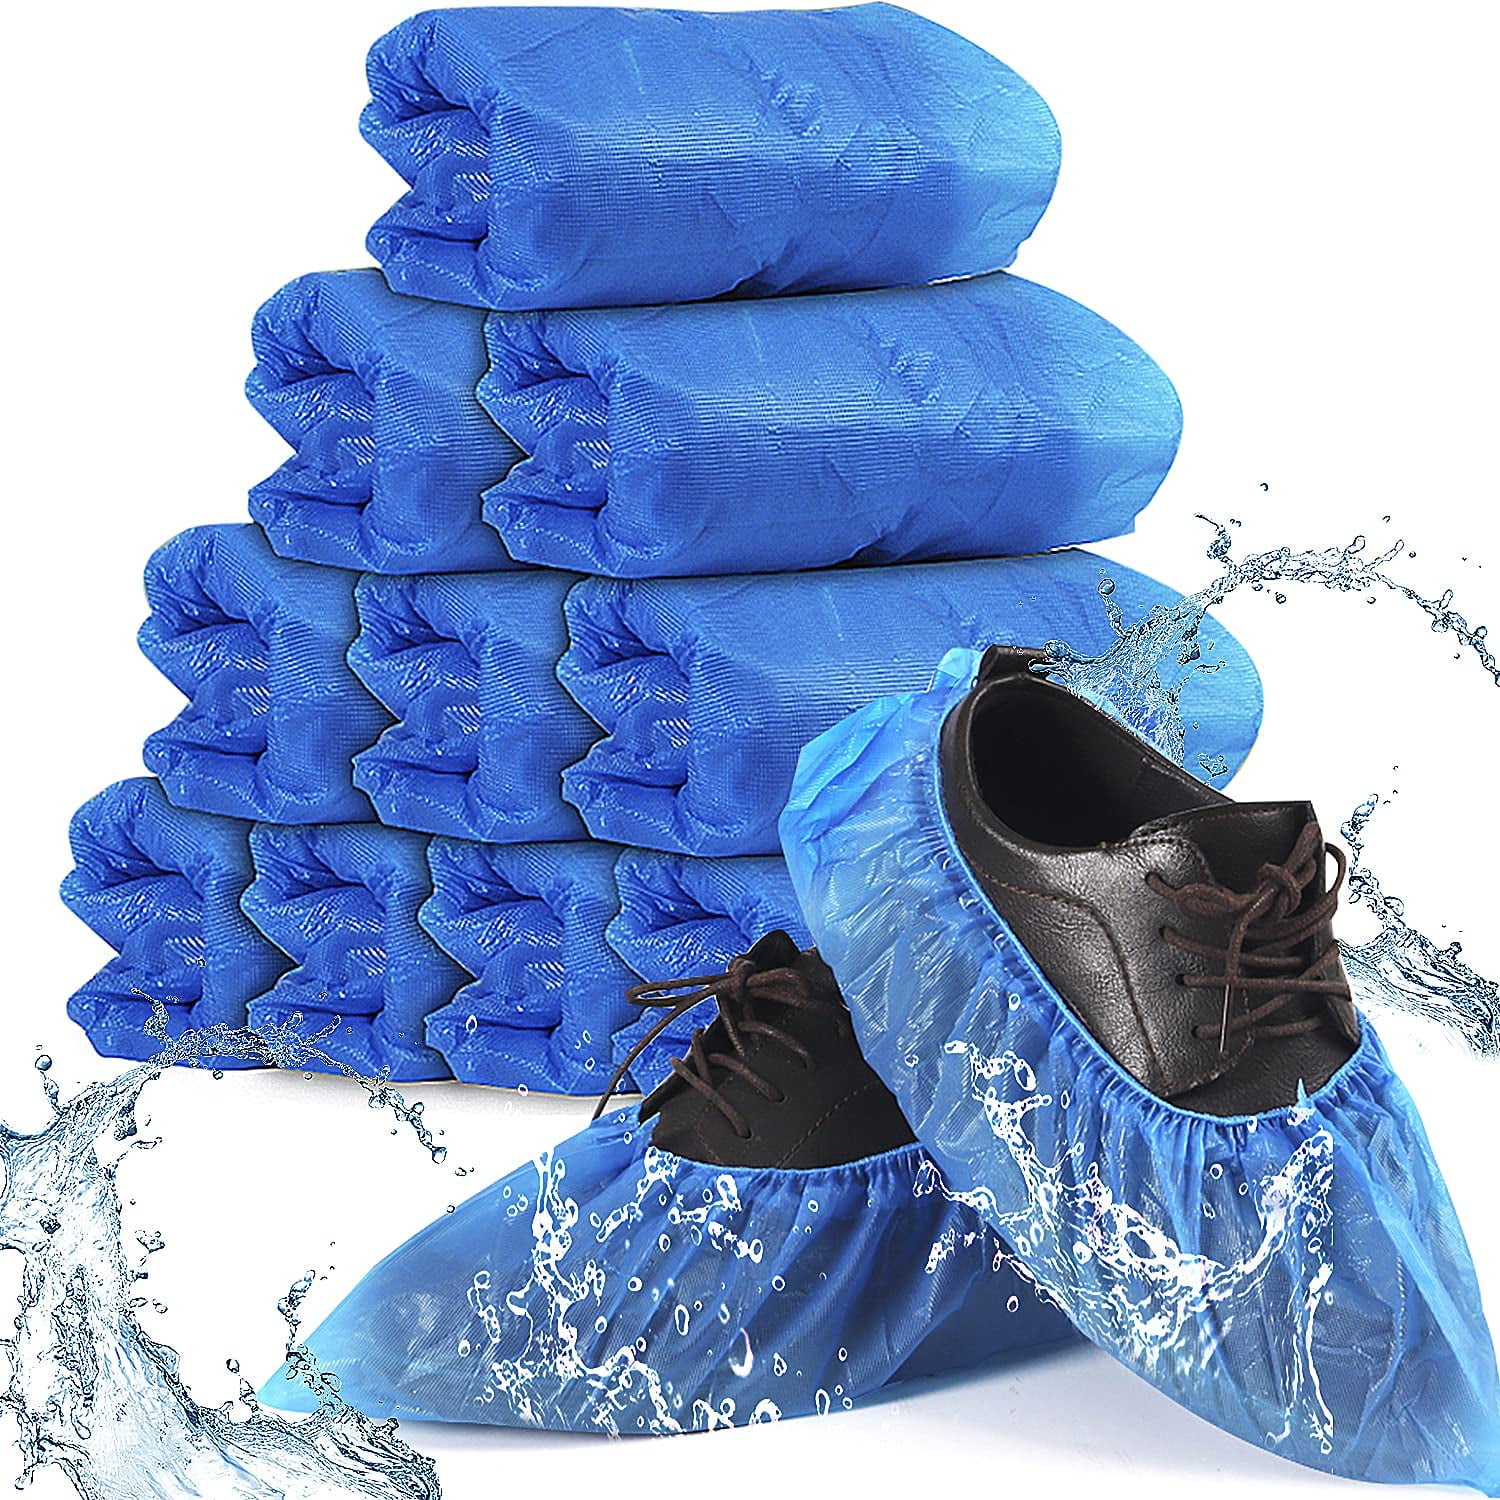 Embossed 50 Premium Blue Disposable Overshoes Shoe Covers 3.5g 